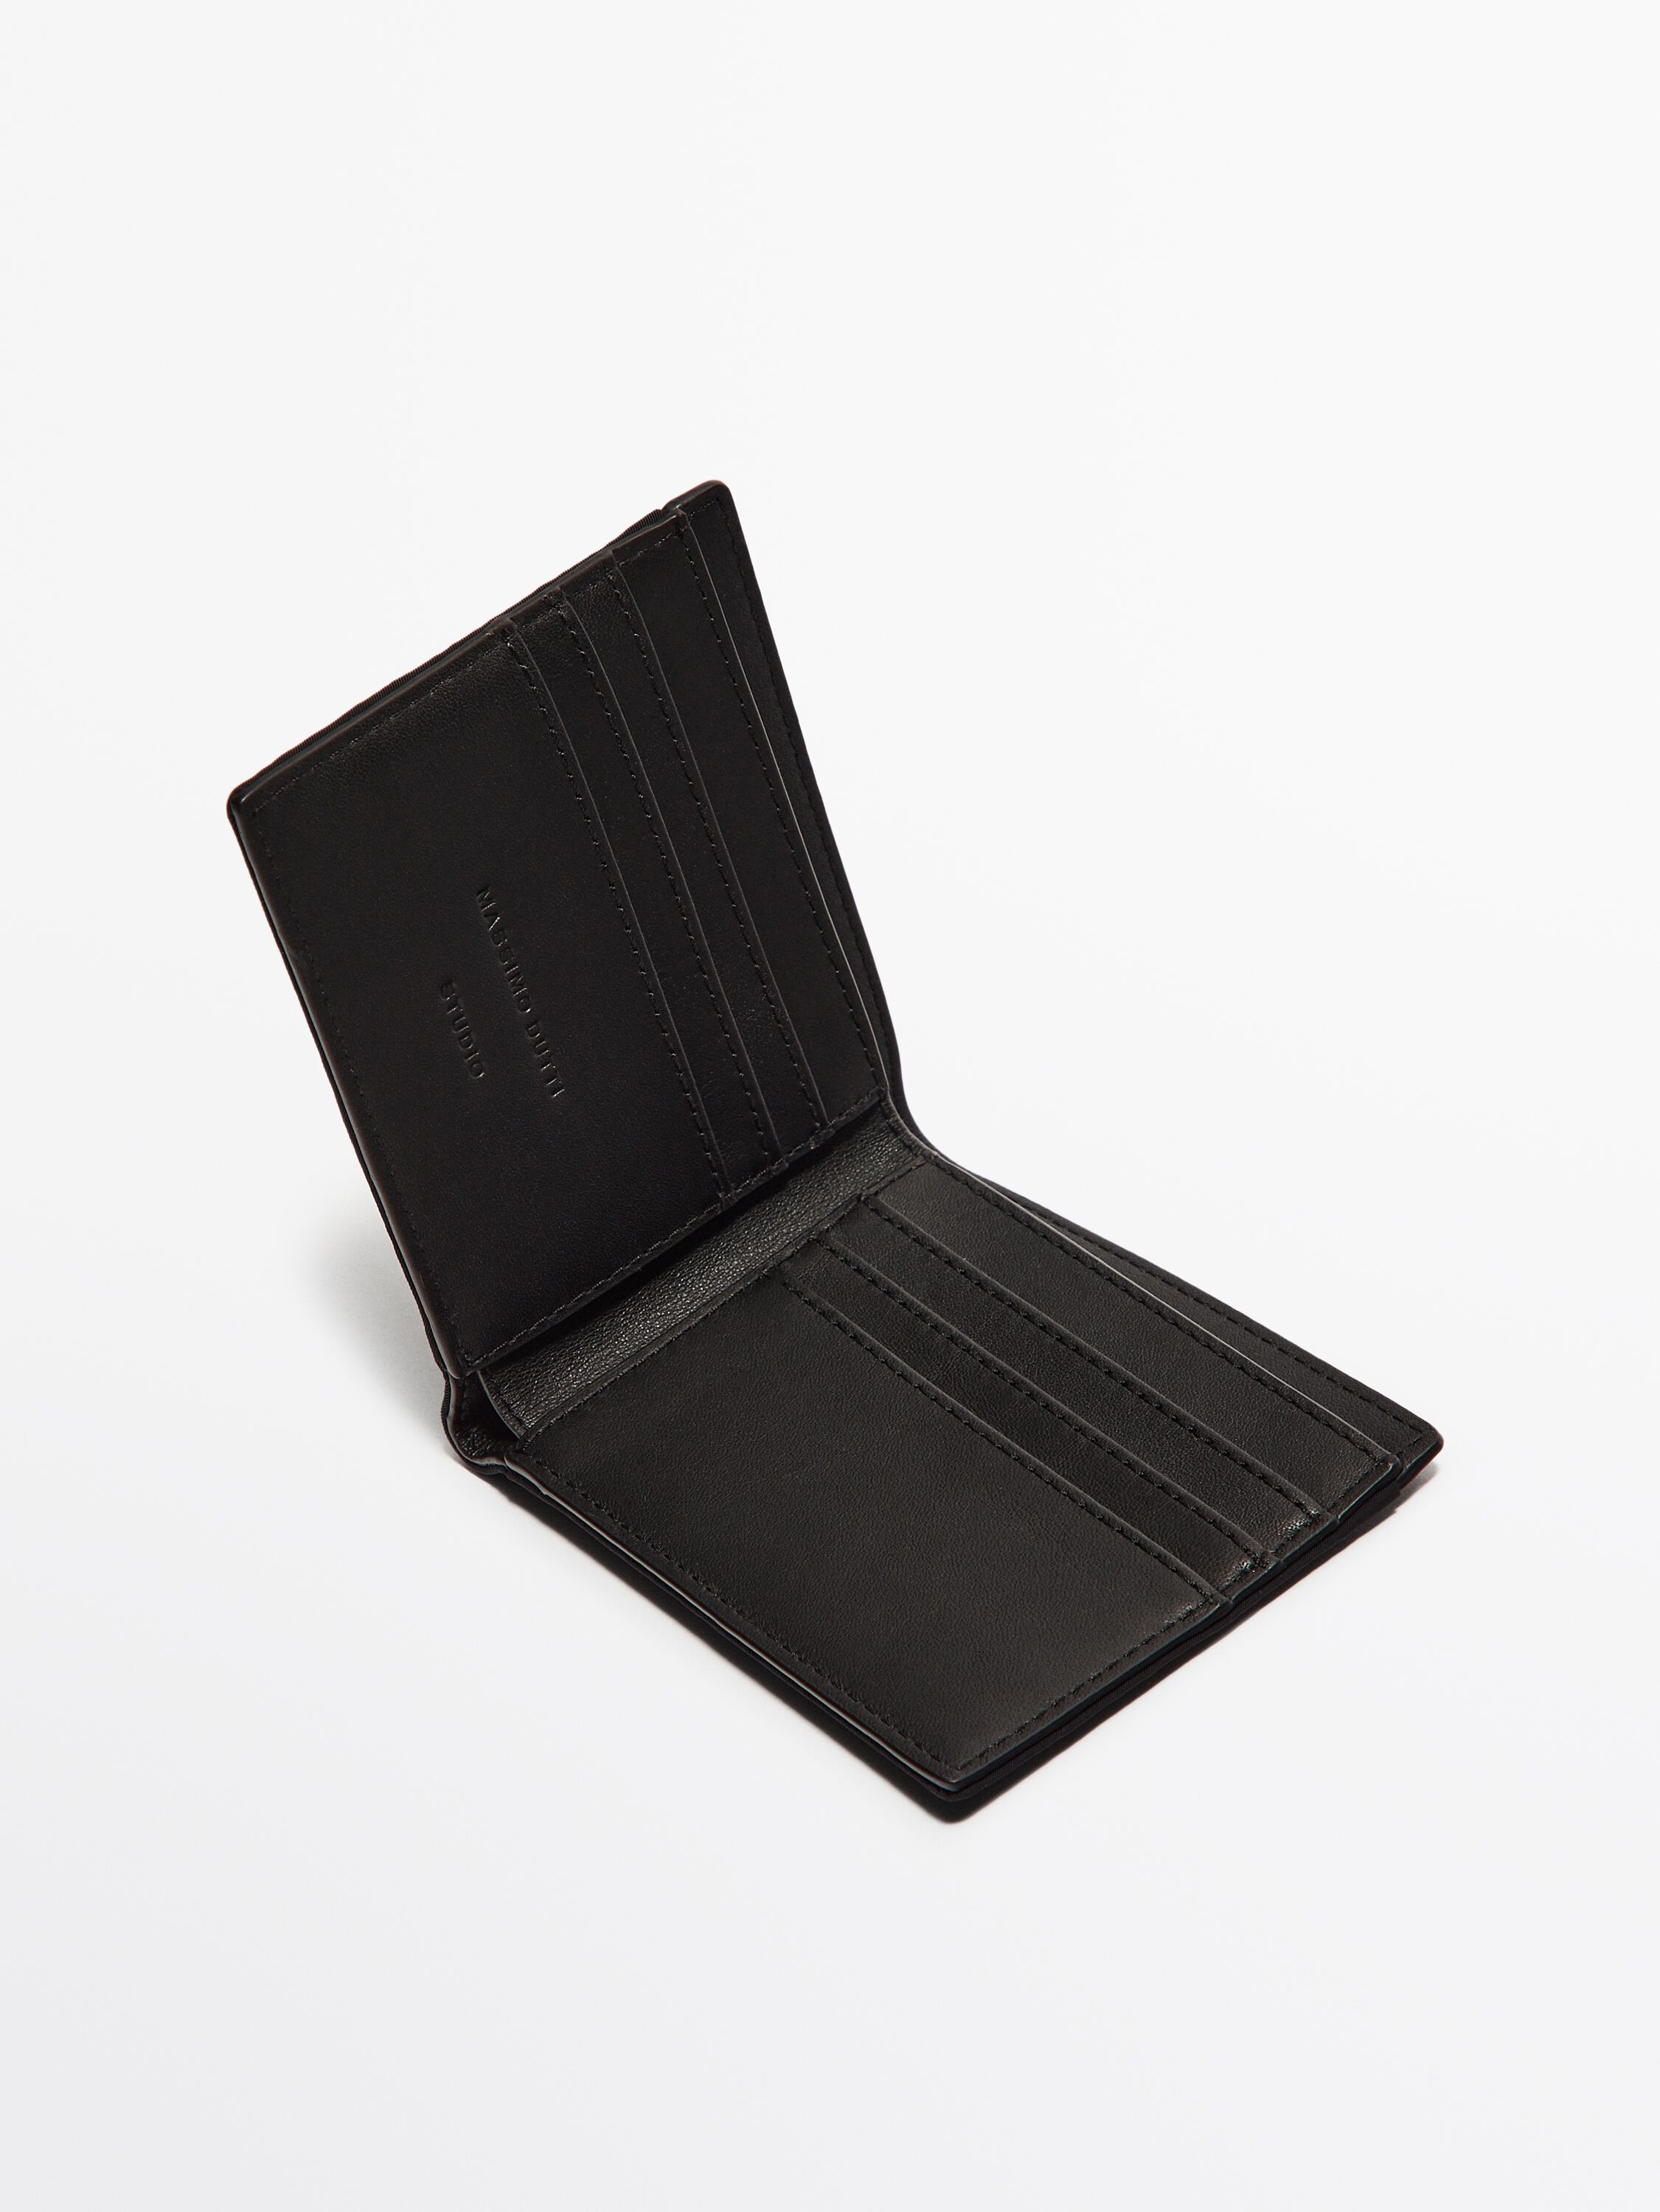 Contrast nylon wallet with leather details - Studio